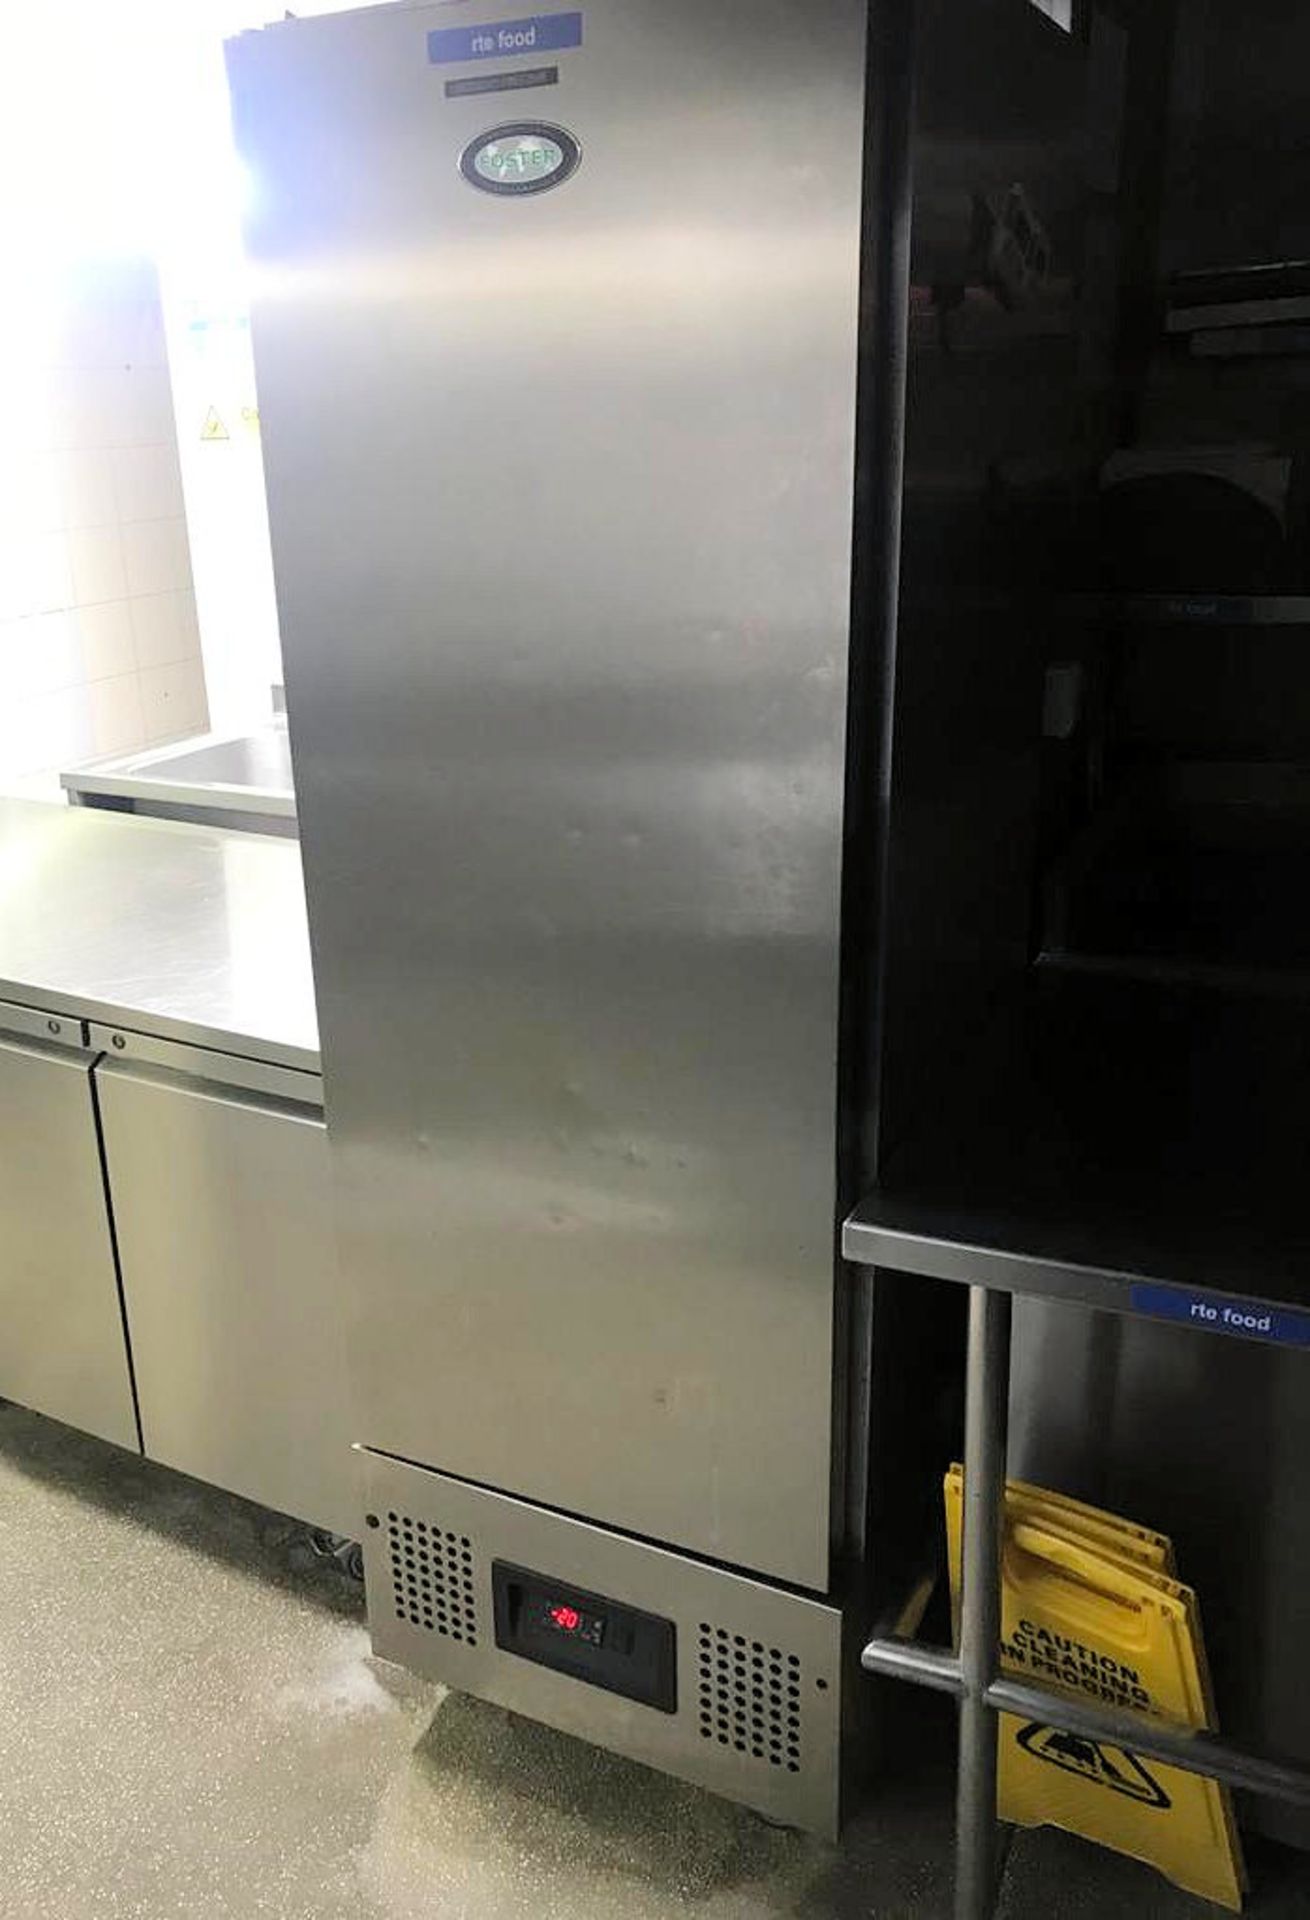 1 x Foster FSL400L Upright Freezer - Recently removed from London premises of a well-known